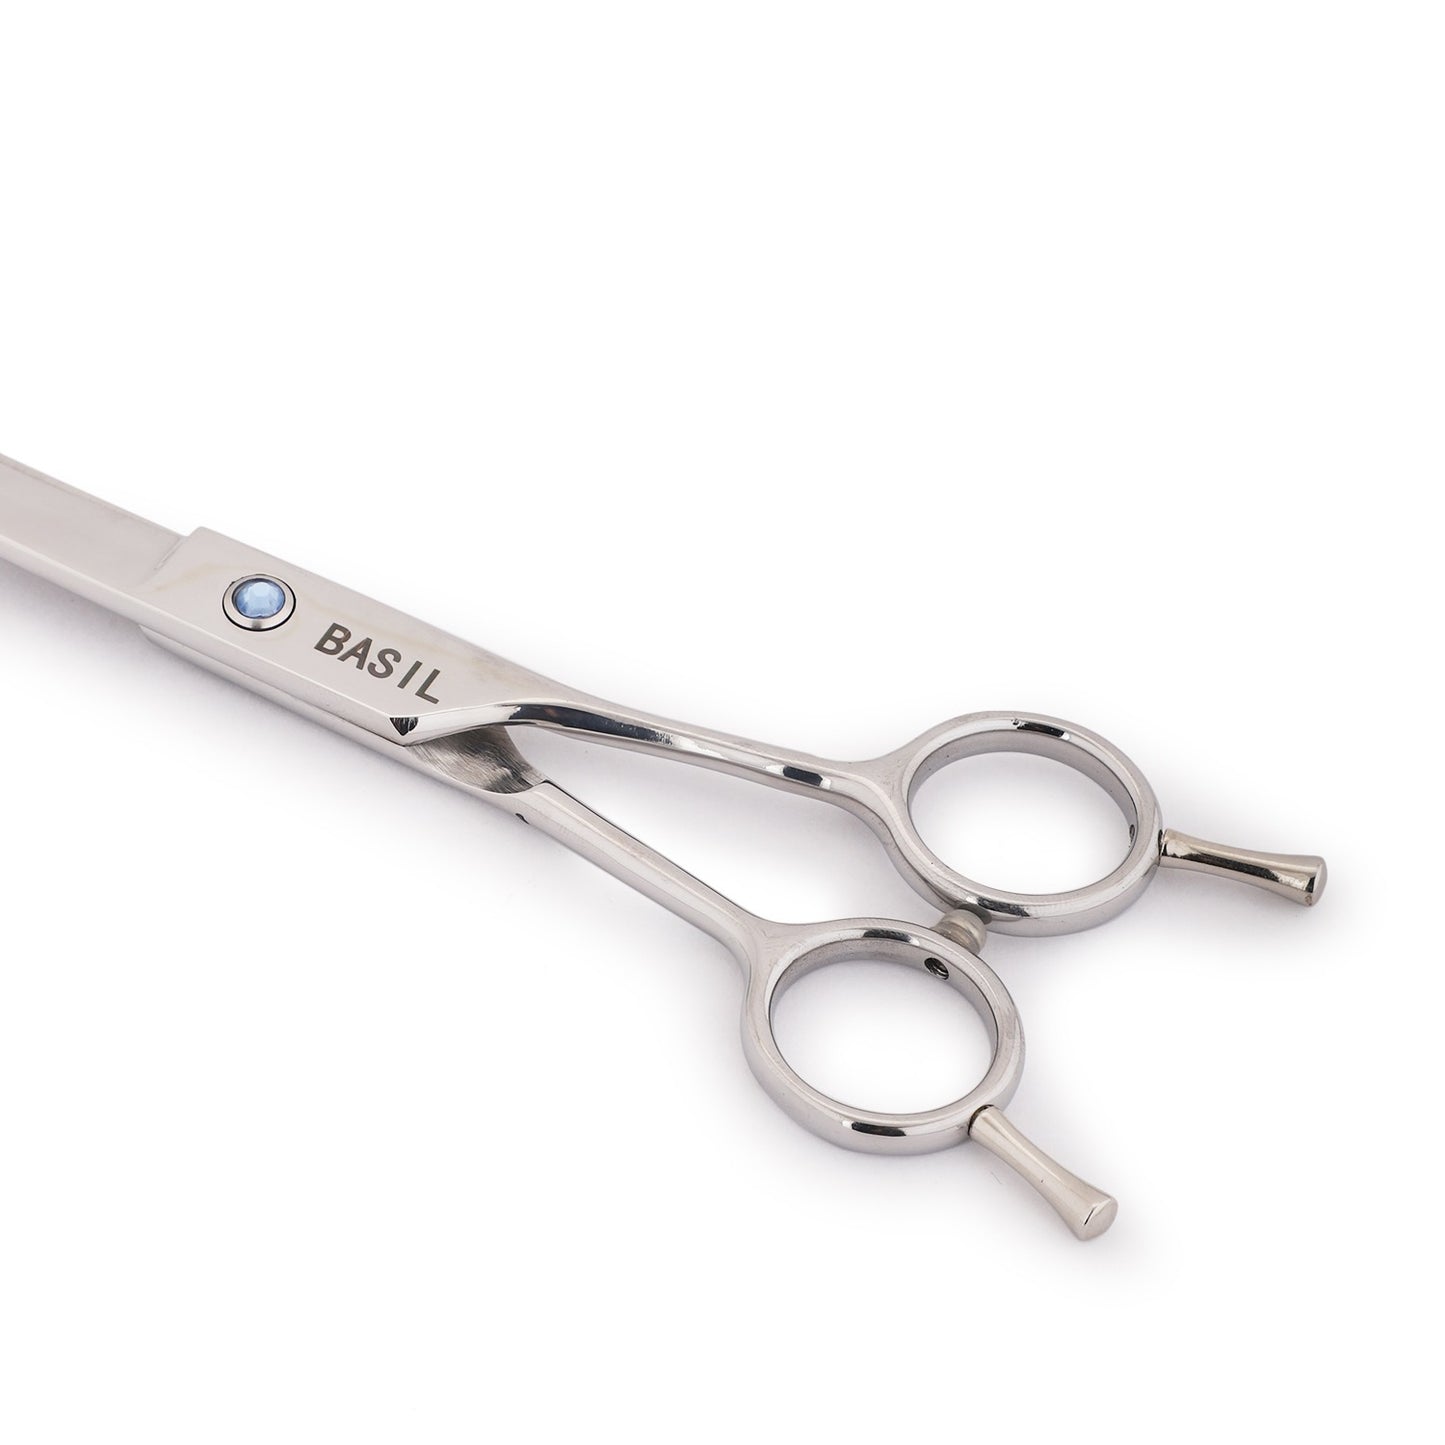 Basil Curved Pro Scissors For Pets